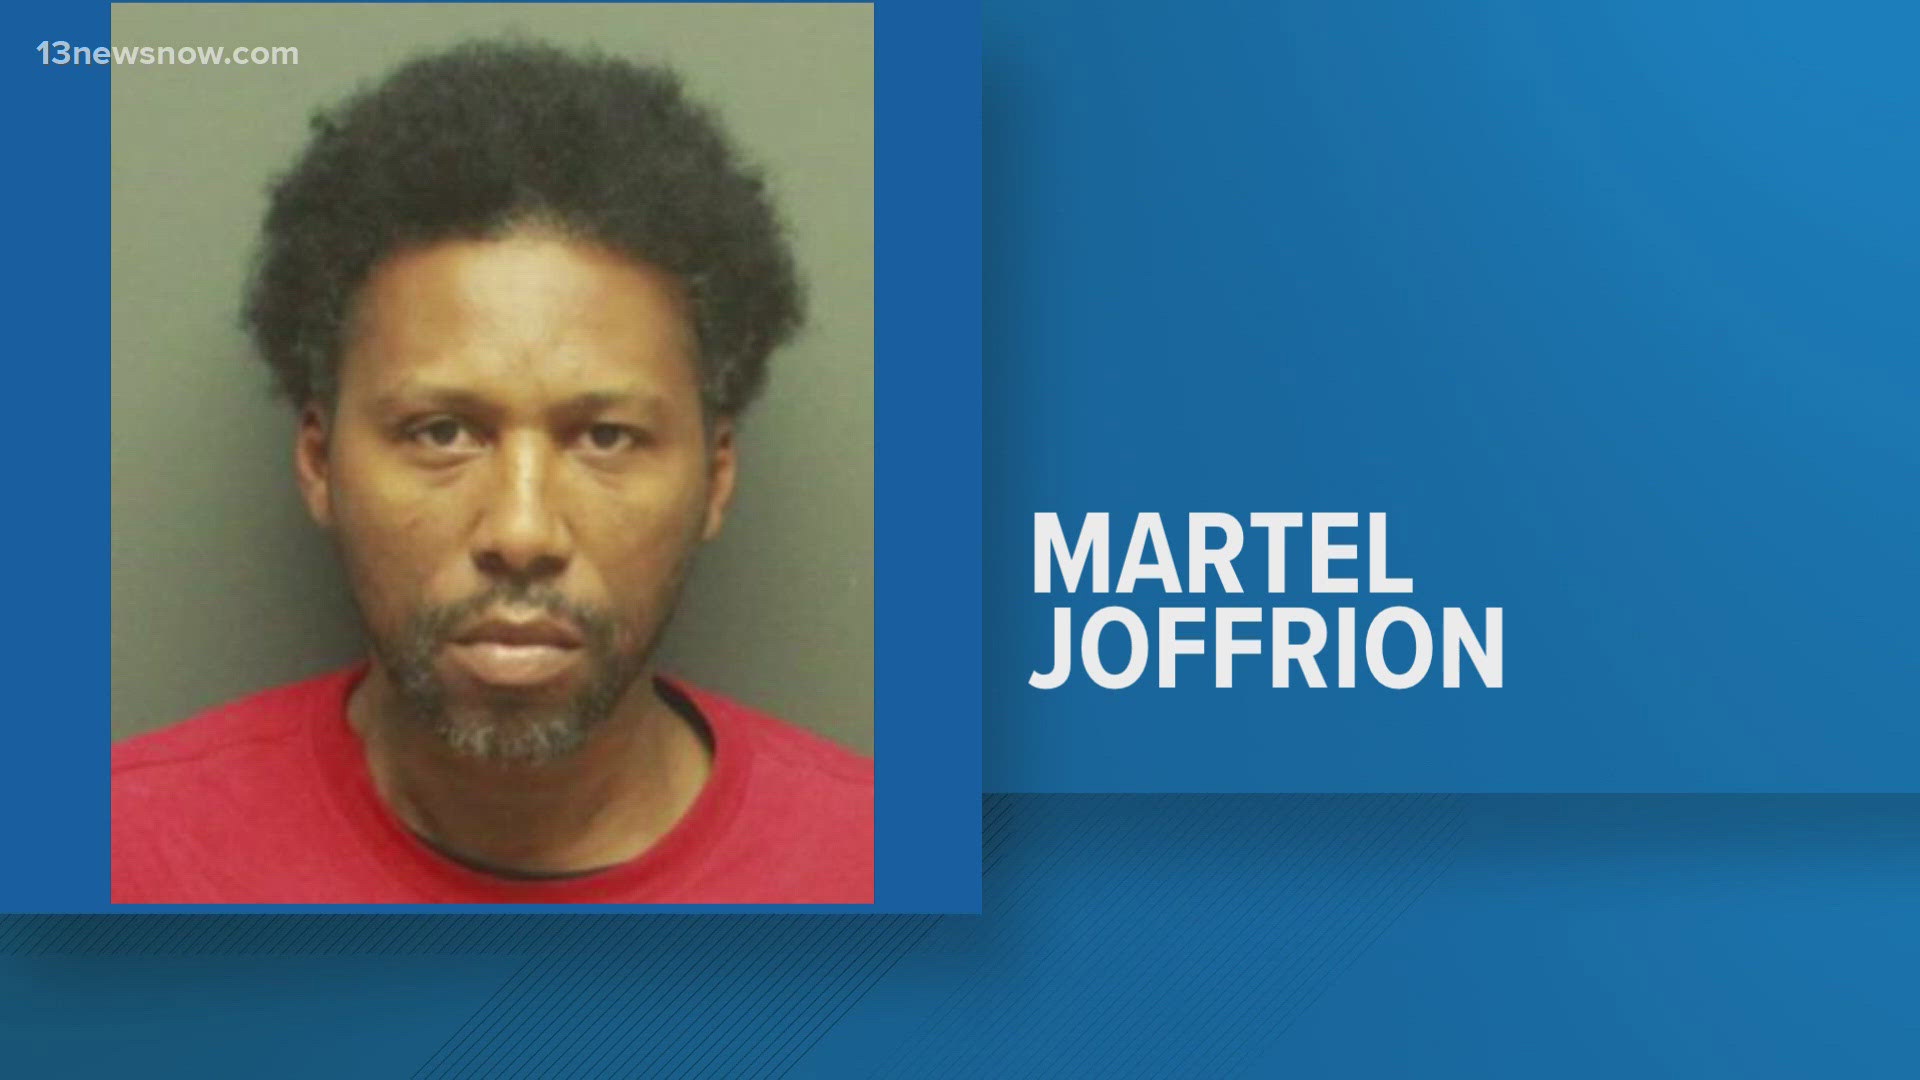 Police have identified a man arrested and charged in connection with a robbery at a Navy Federal Credit Union, that ended in a deadly police shooting.